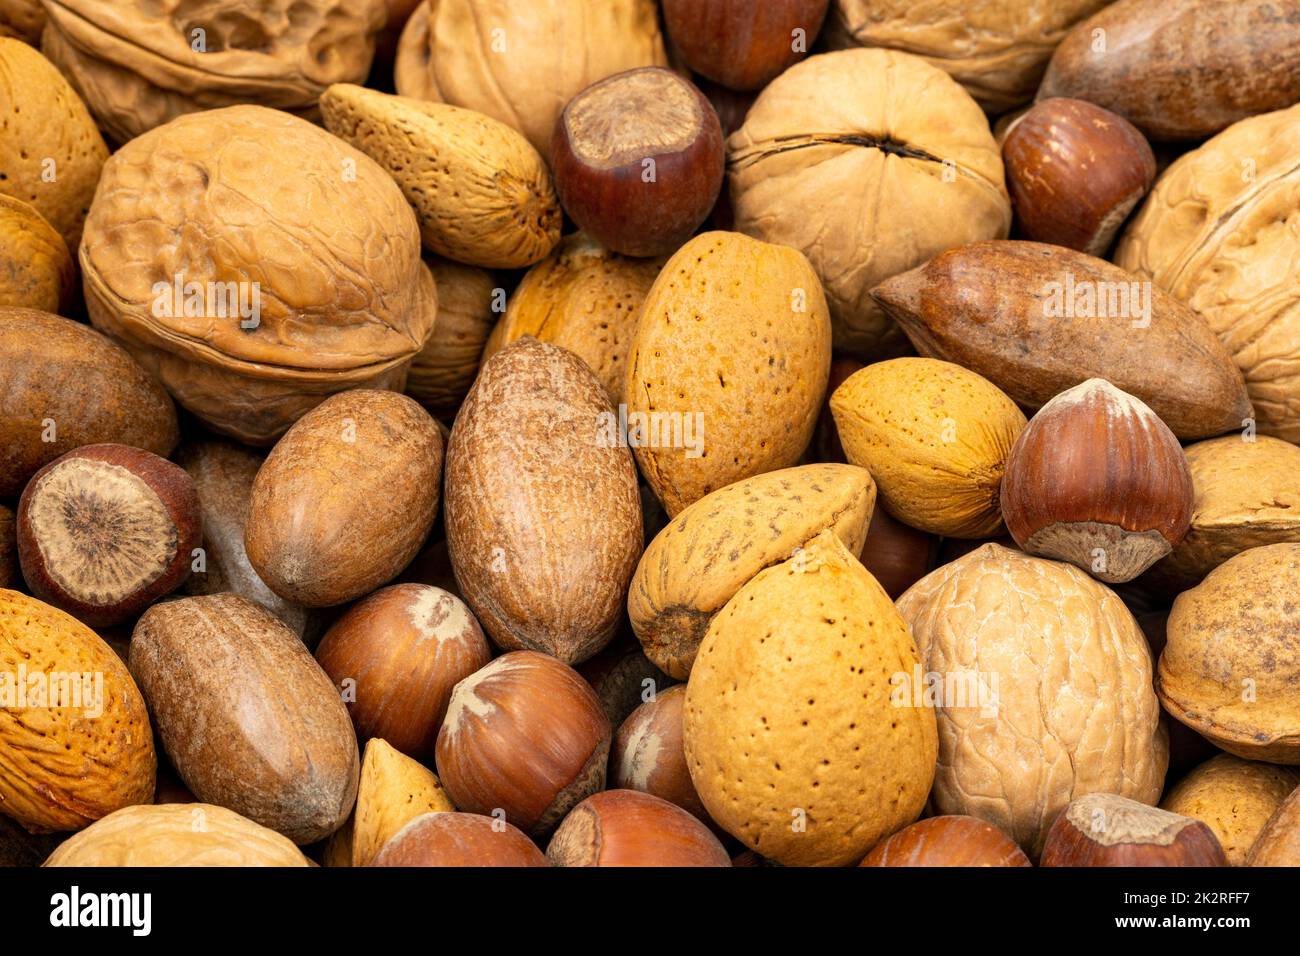 Assortment of nuts in shells Stock Photo